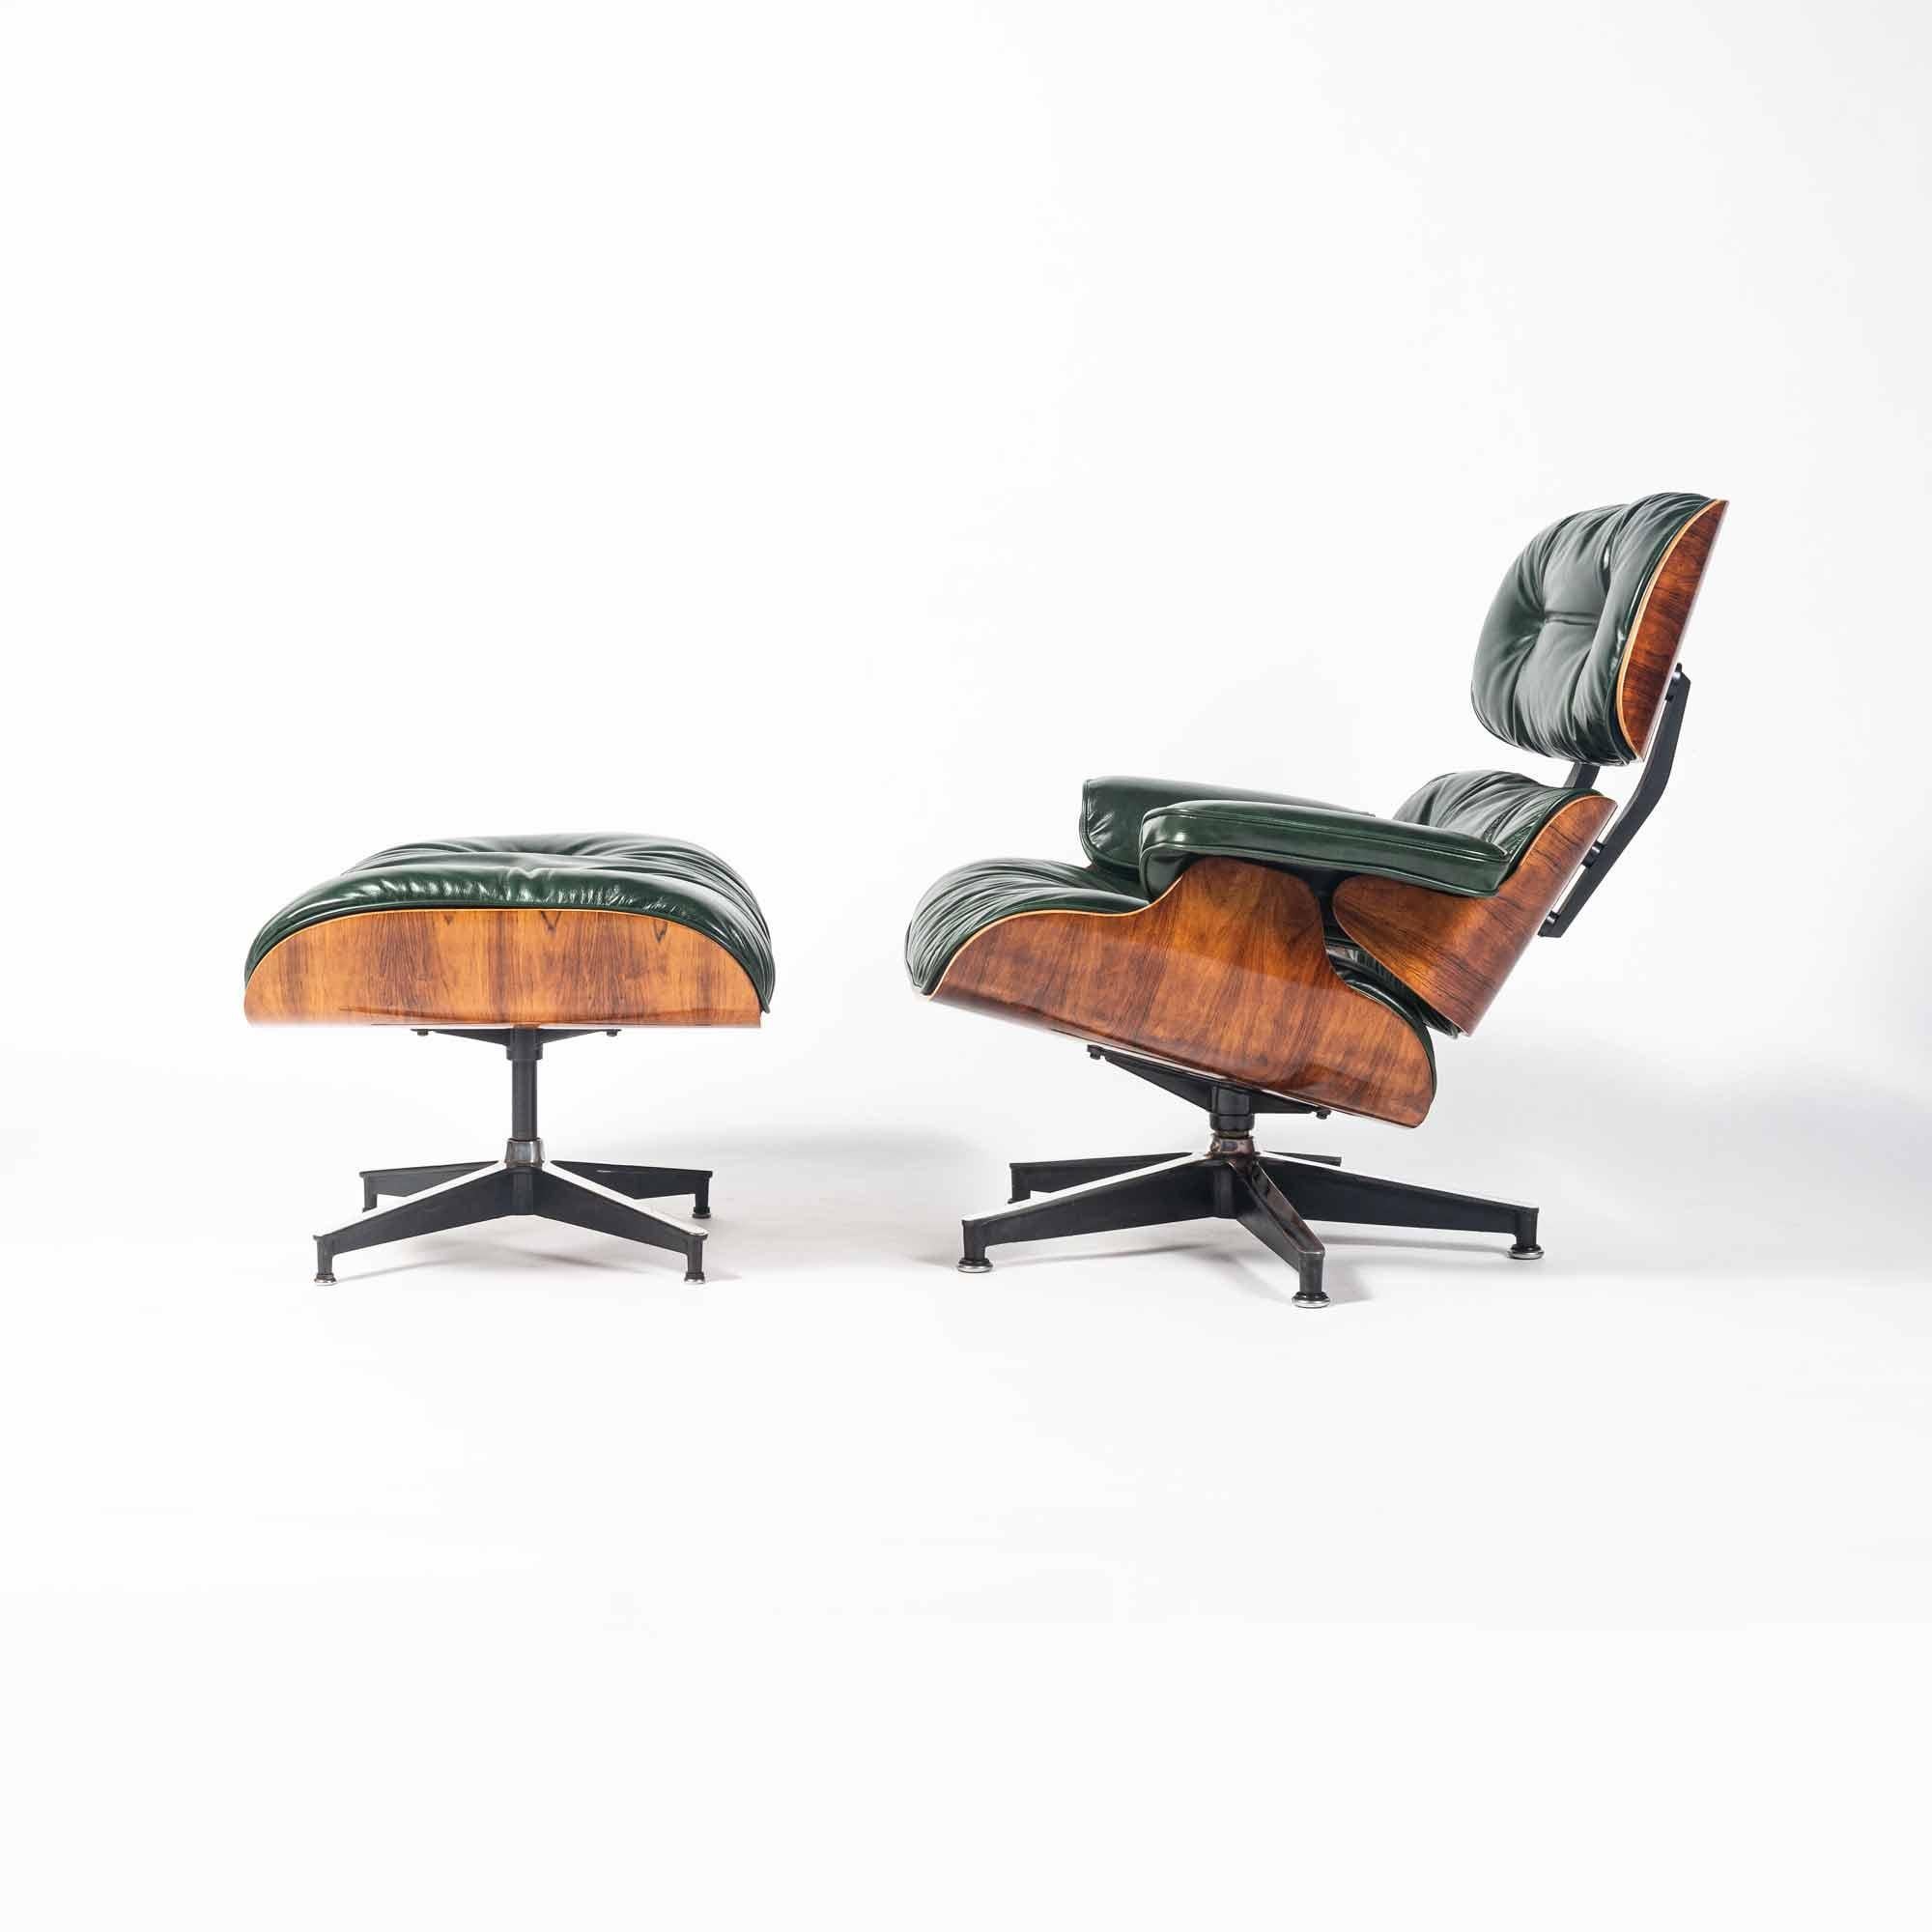 Please note: Pictures are from the previous customed upholstered Eames Lounge Chair in British Racing Green Leather. Please reach out for images of the current one in restoration.

We are excited to offer a pre-sale of our upcoming 3rd Gen Eames